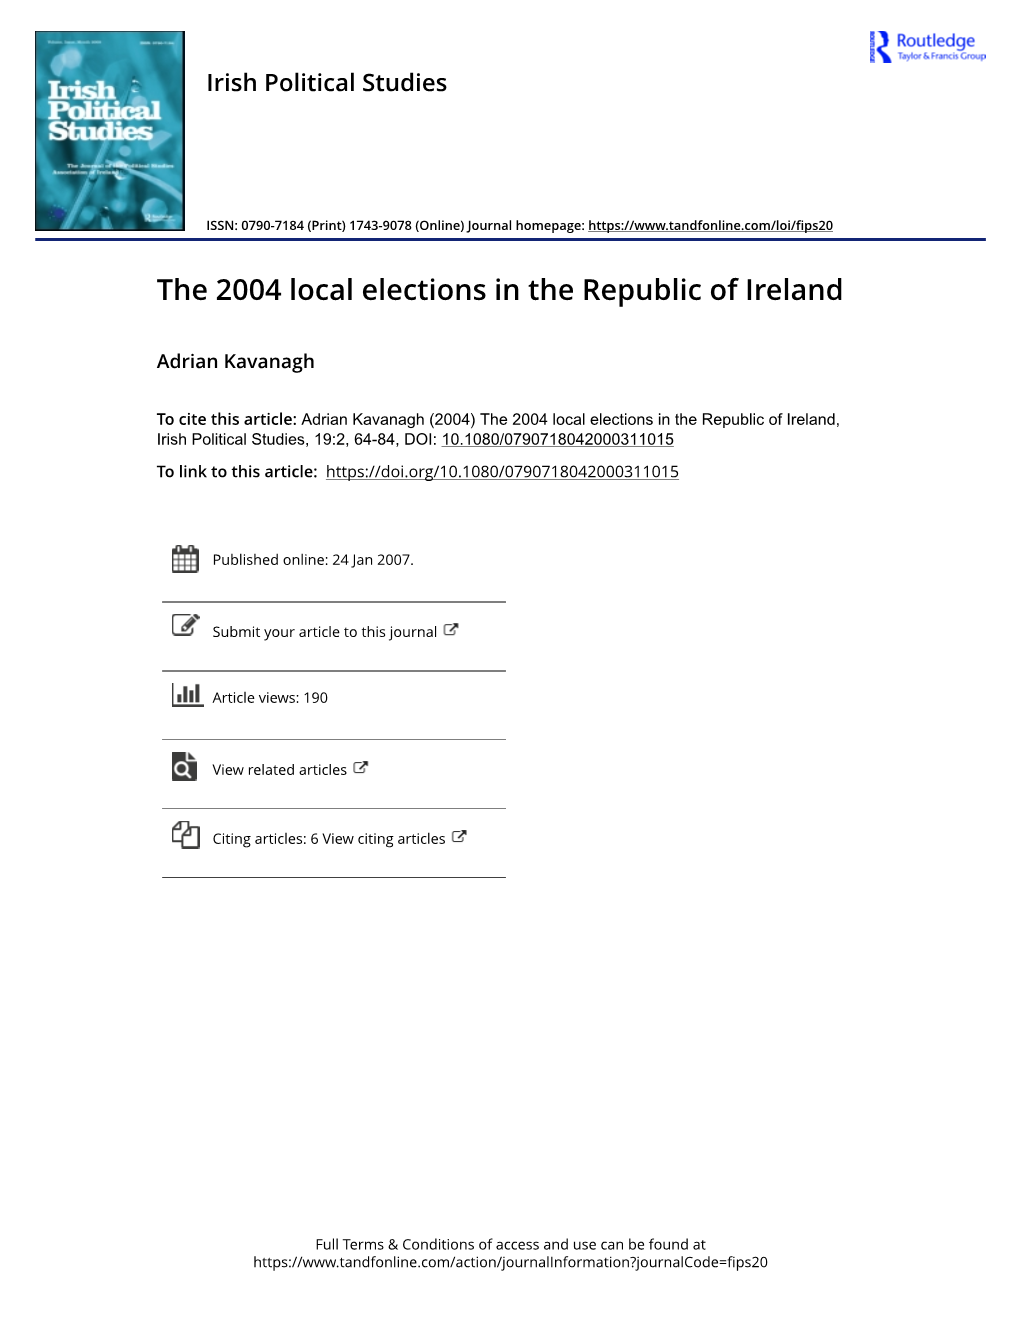 The 2004 Local Elections in the Republic of Ireland